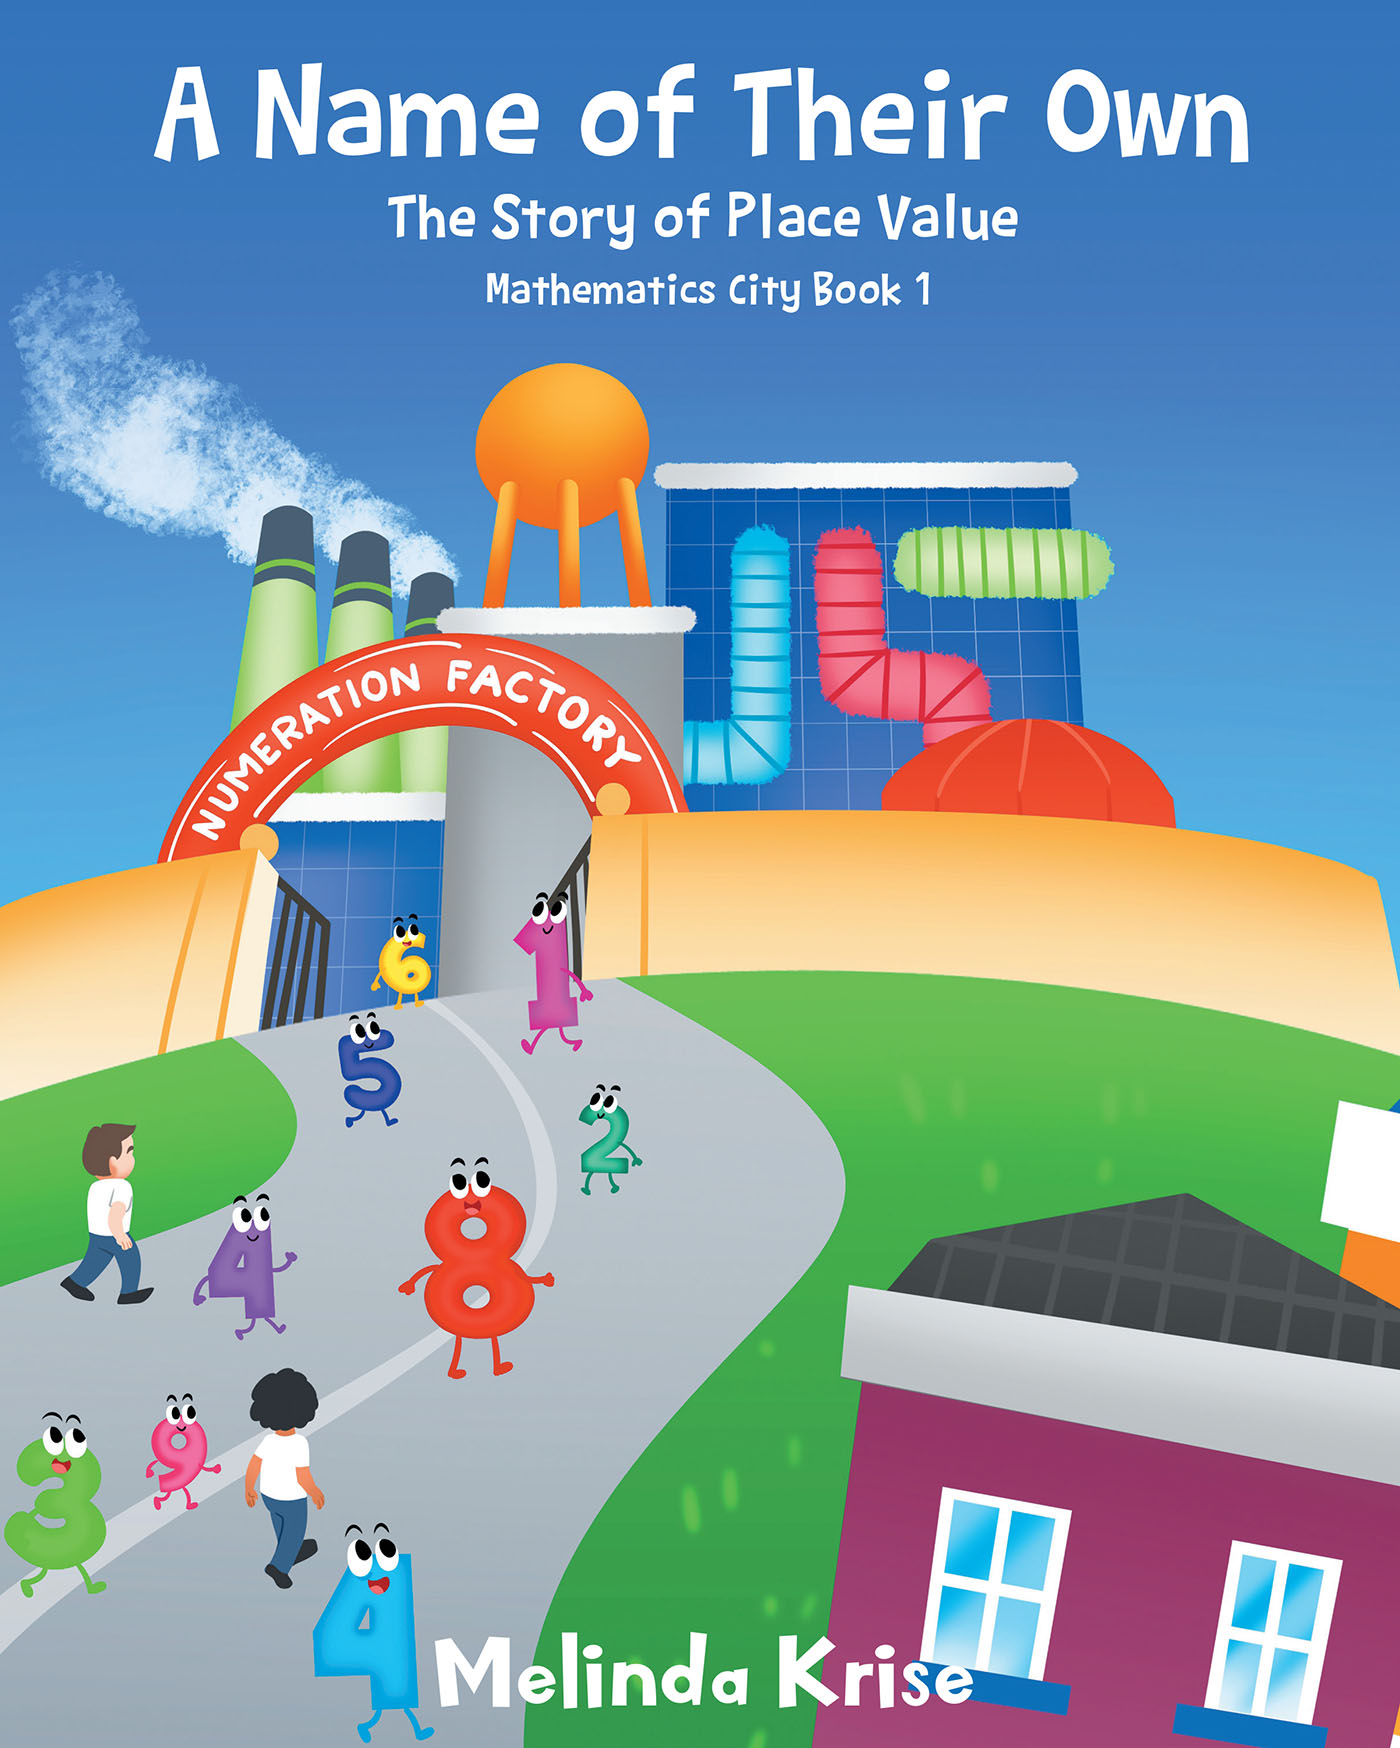 Melinda Krise’s New Book, “A Name of Their Own: The Story of Place Value,” is a Riveting Tale Designed to Help Readers Understand Numbers and the Origins of Their Names